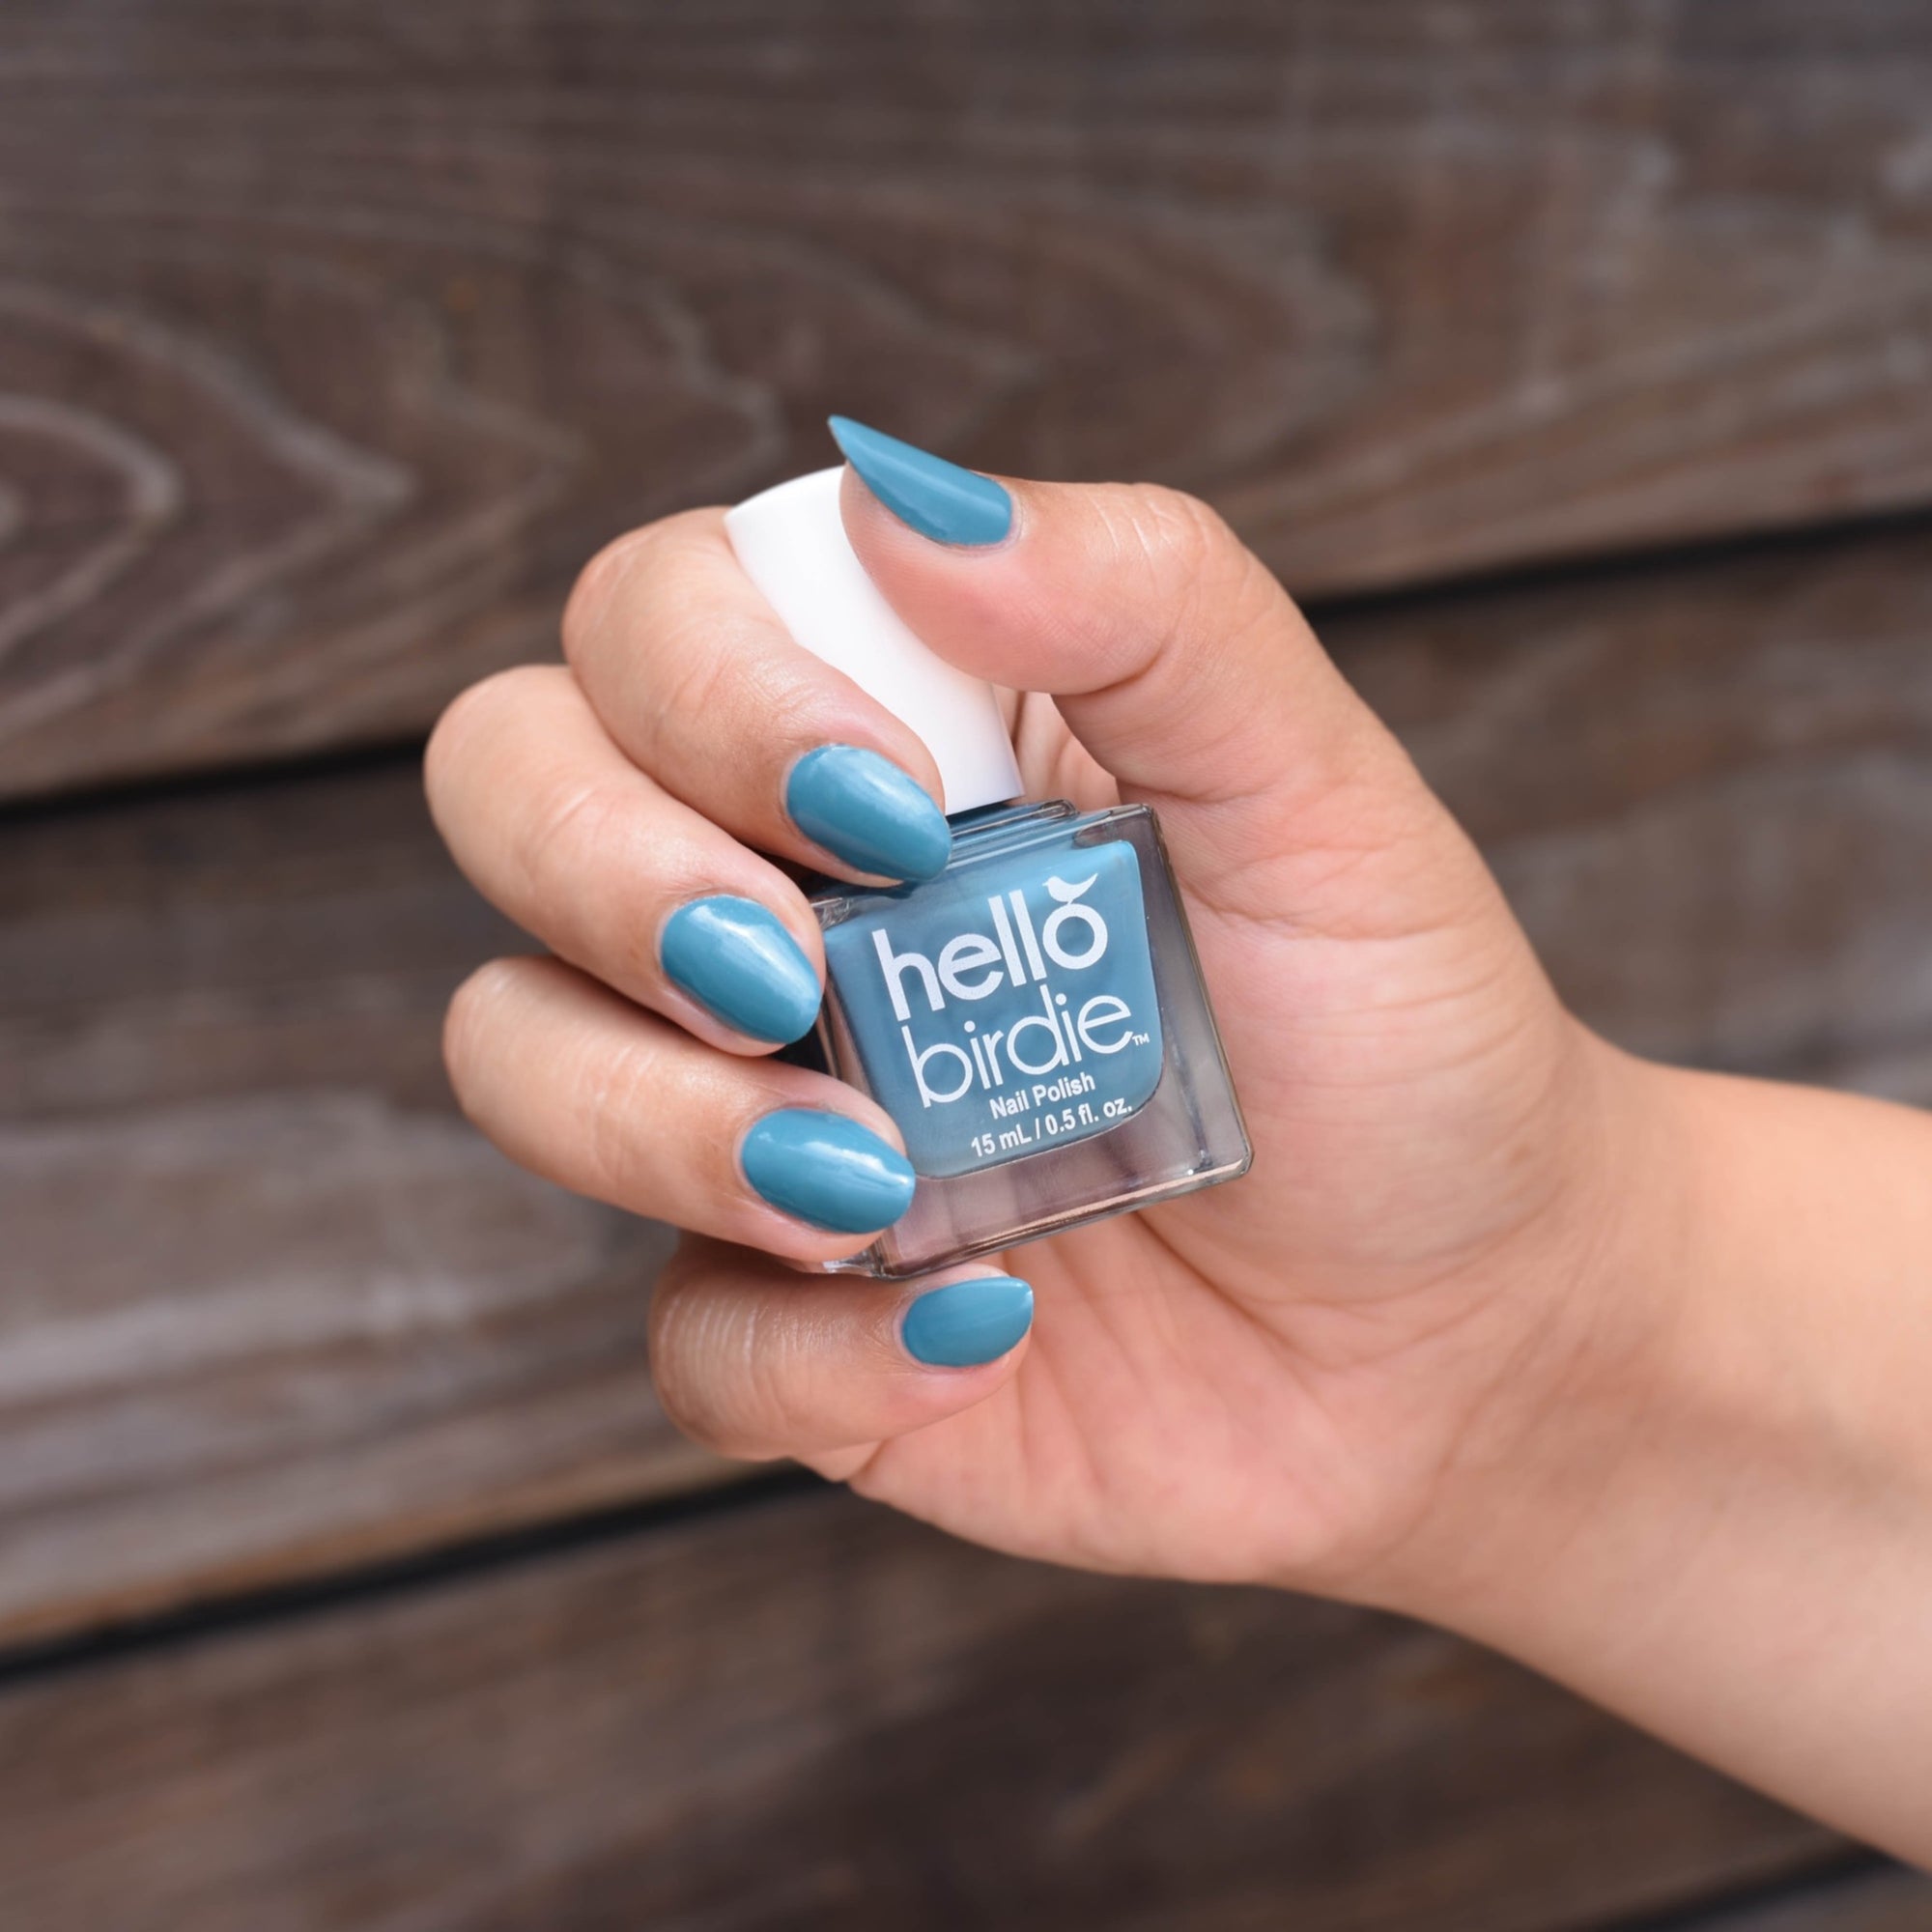 A model's hand is shown holding a bottle of Hello Birdie's Eggsistential nail polish. She has the color painted on her nails and it is a muted blueish teal.  The background shows horizontal wood panels.